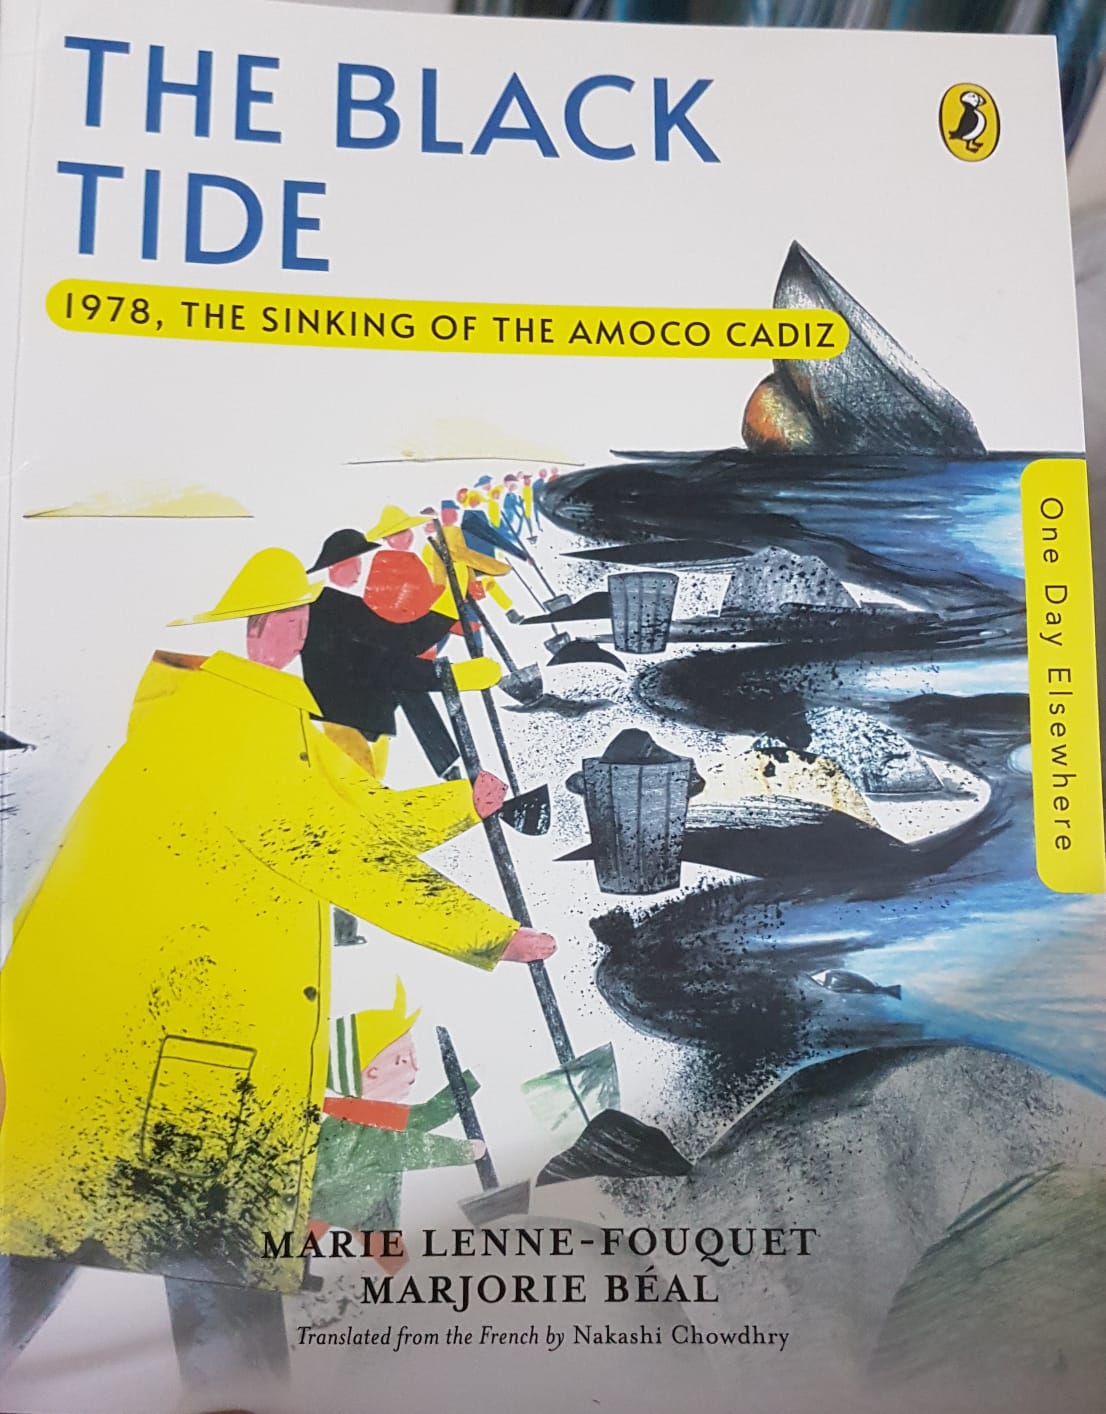 Review: The Black Tide: 1978, The Sinking Of The Amoco Cadiz